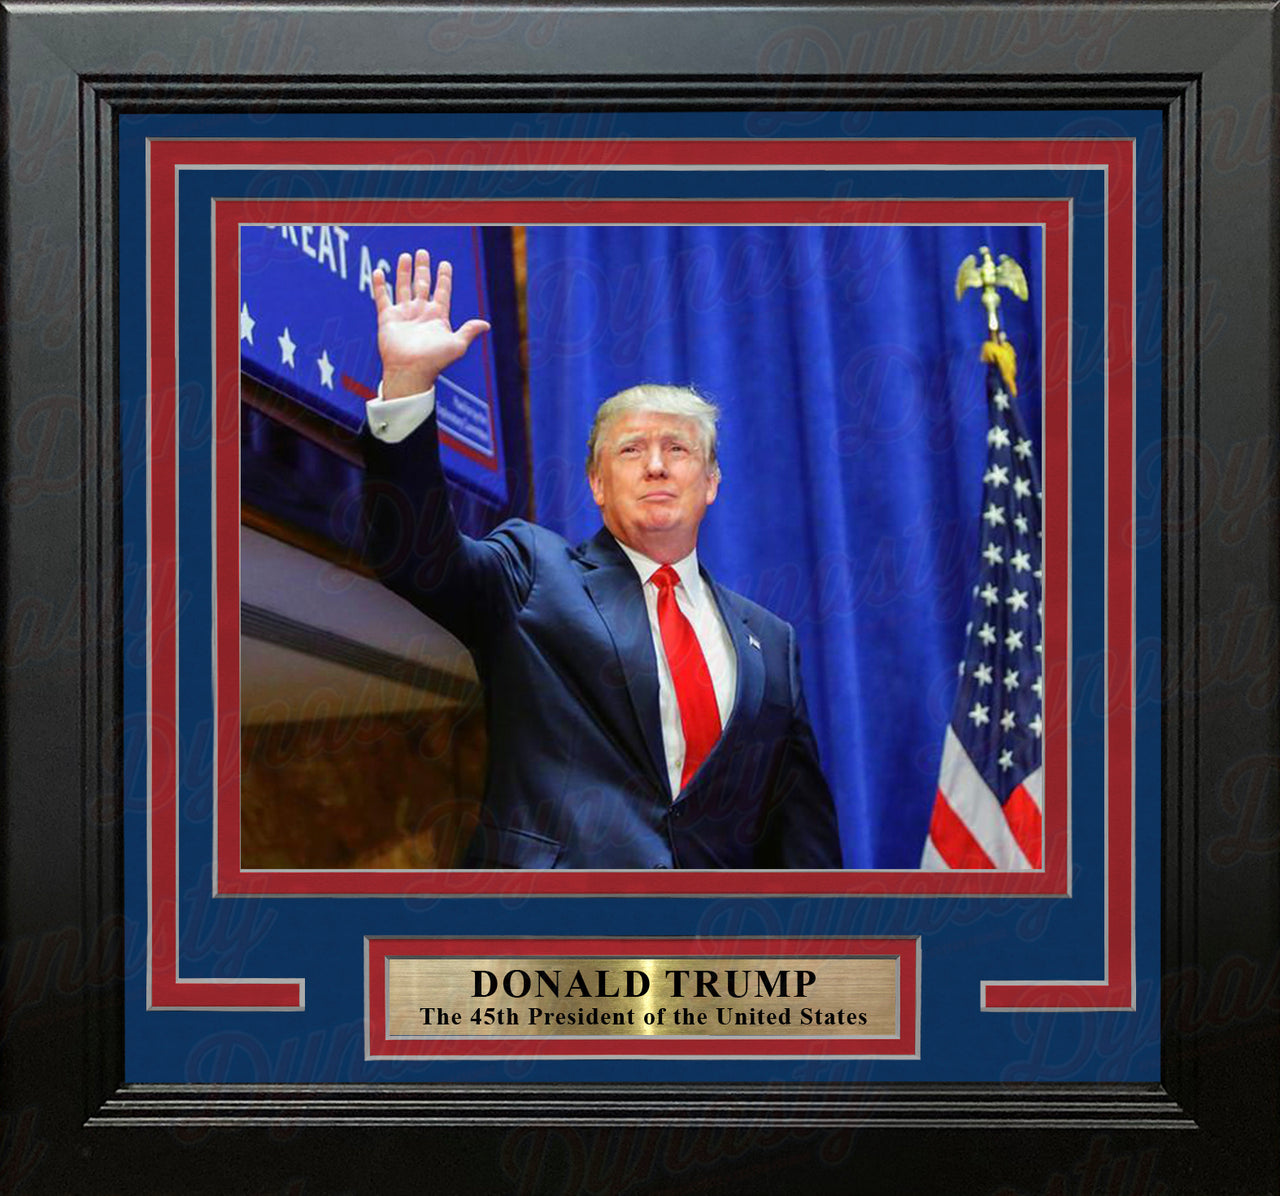 Donald Trump 45th President of the United States 8" x 10" Framed Photo - Dynasty Sports & Framing 